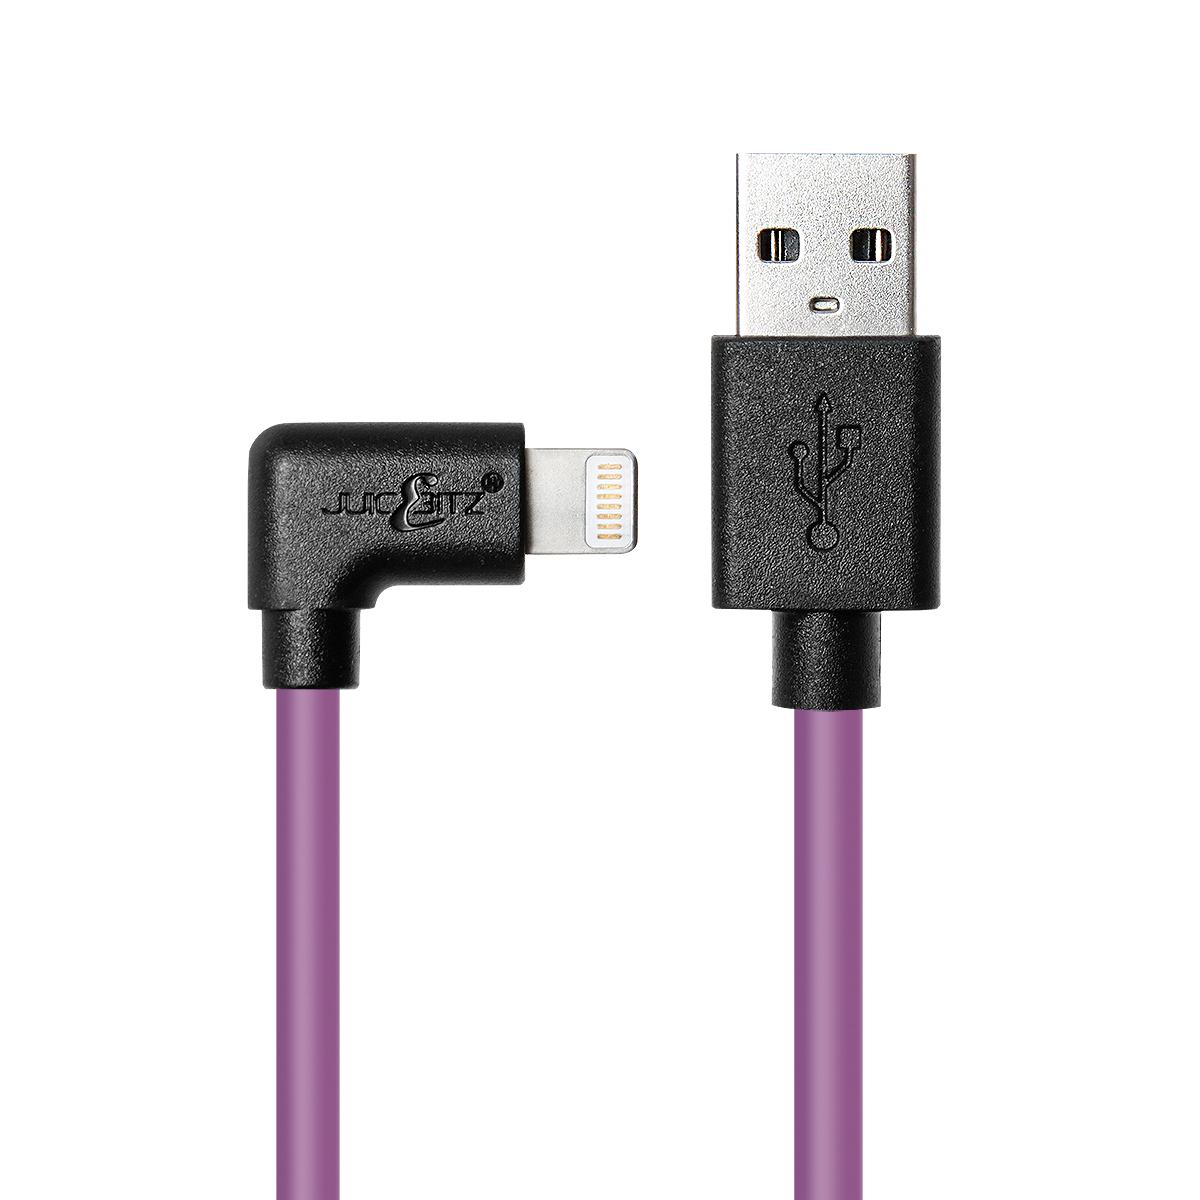 Heavy Duty Angled USB Charger Cable Data Sync Lead for iPhone, iPad, iPod - Purple